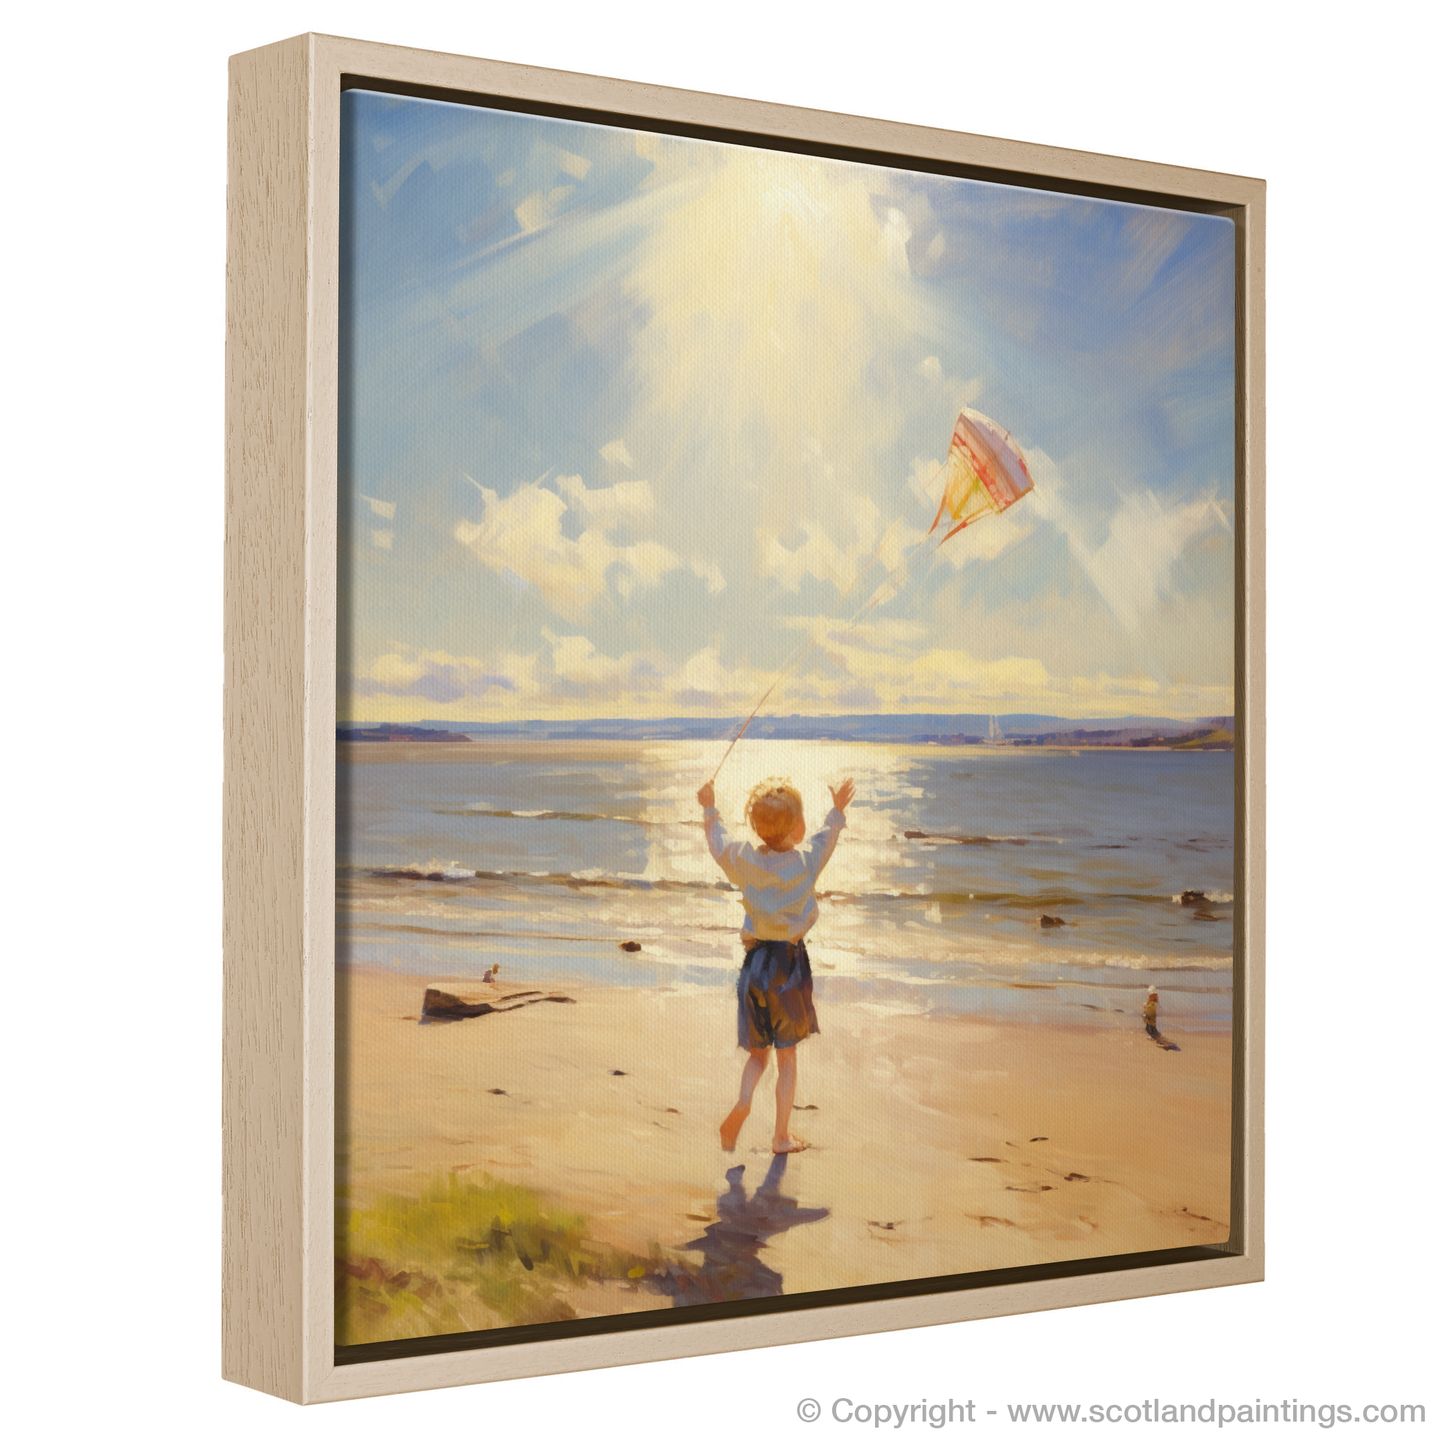 Painting and Art Print of A young boy flying a kite on the expansive shores of Nairn Beach, with the Moray Firth sparkling in the sunlight entitled "Kite Flying Bliss on Nairn Beach".